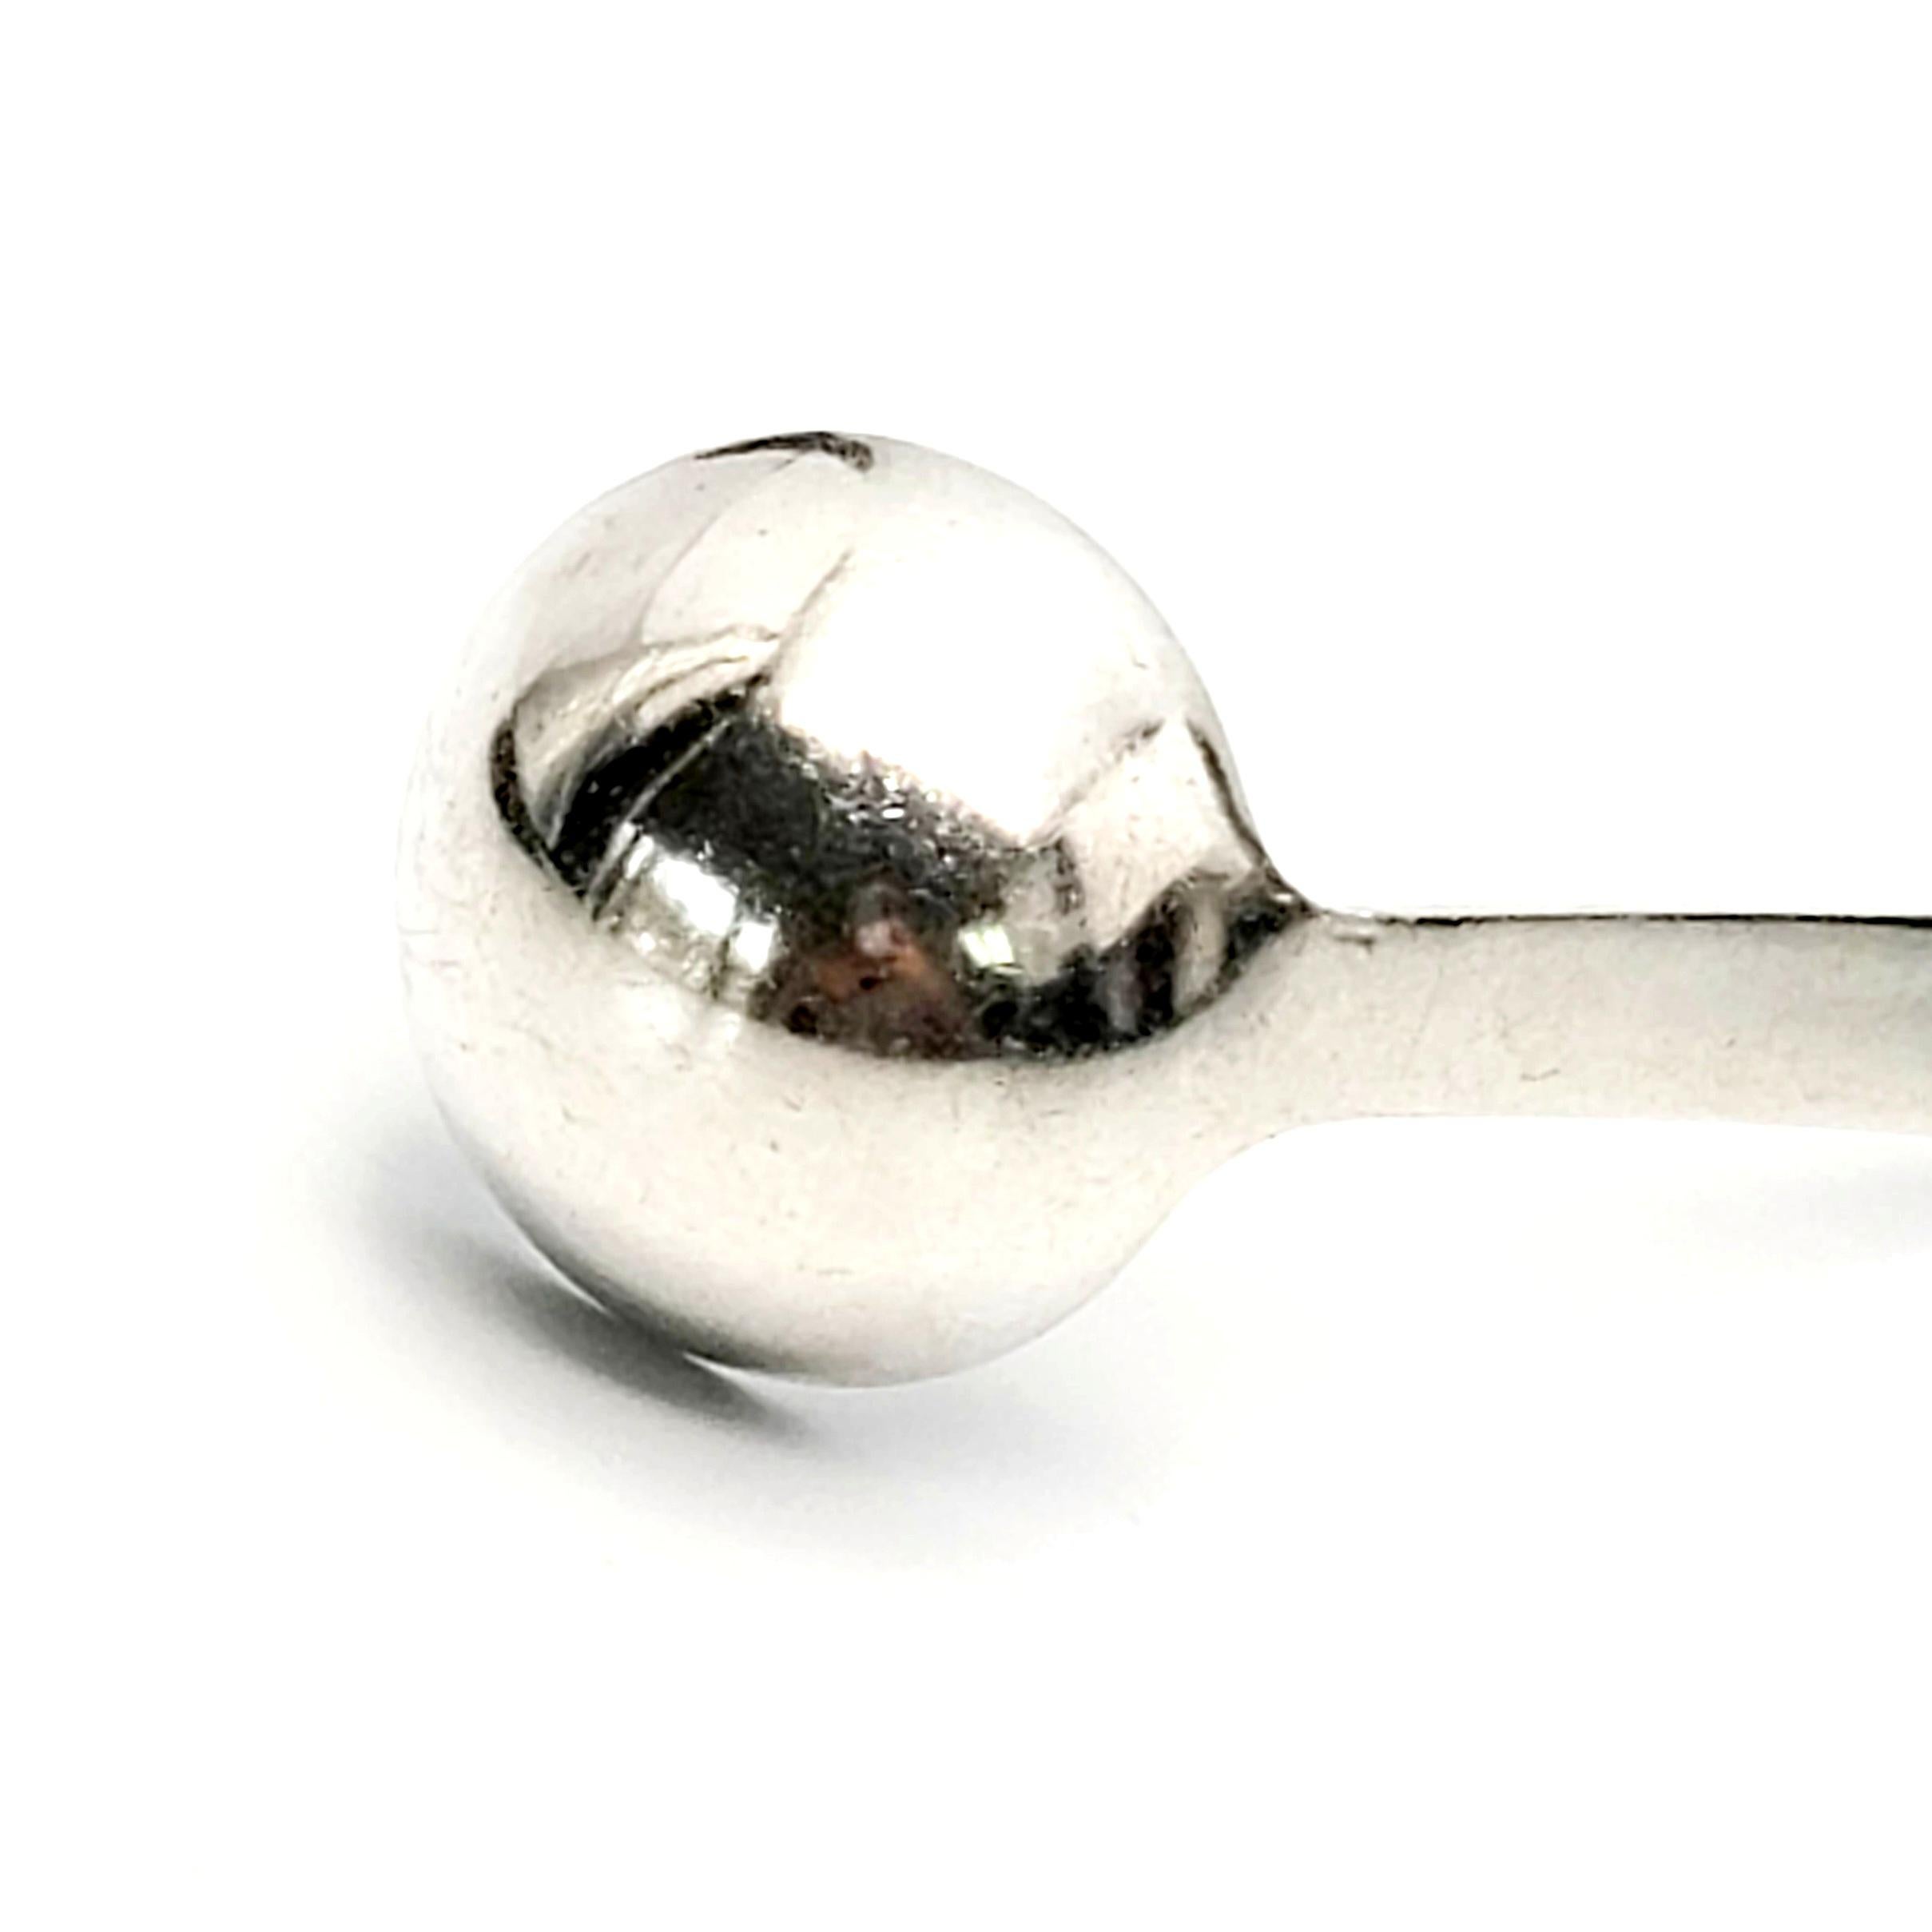 Taxco Mexico Damaso Gallegos Sterling Silver Condiment Ladle For Sale 1